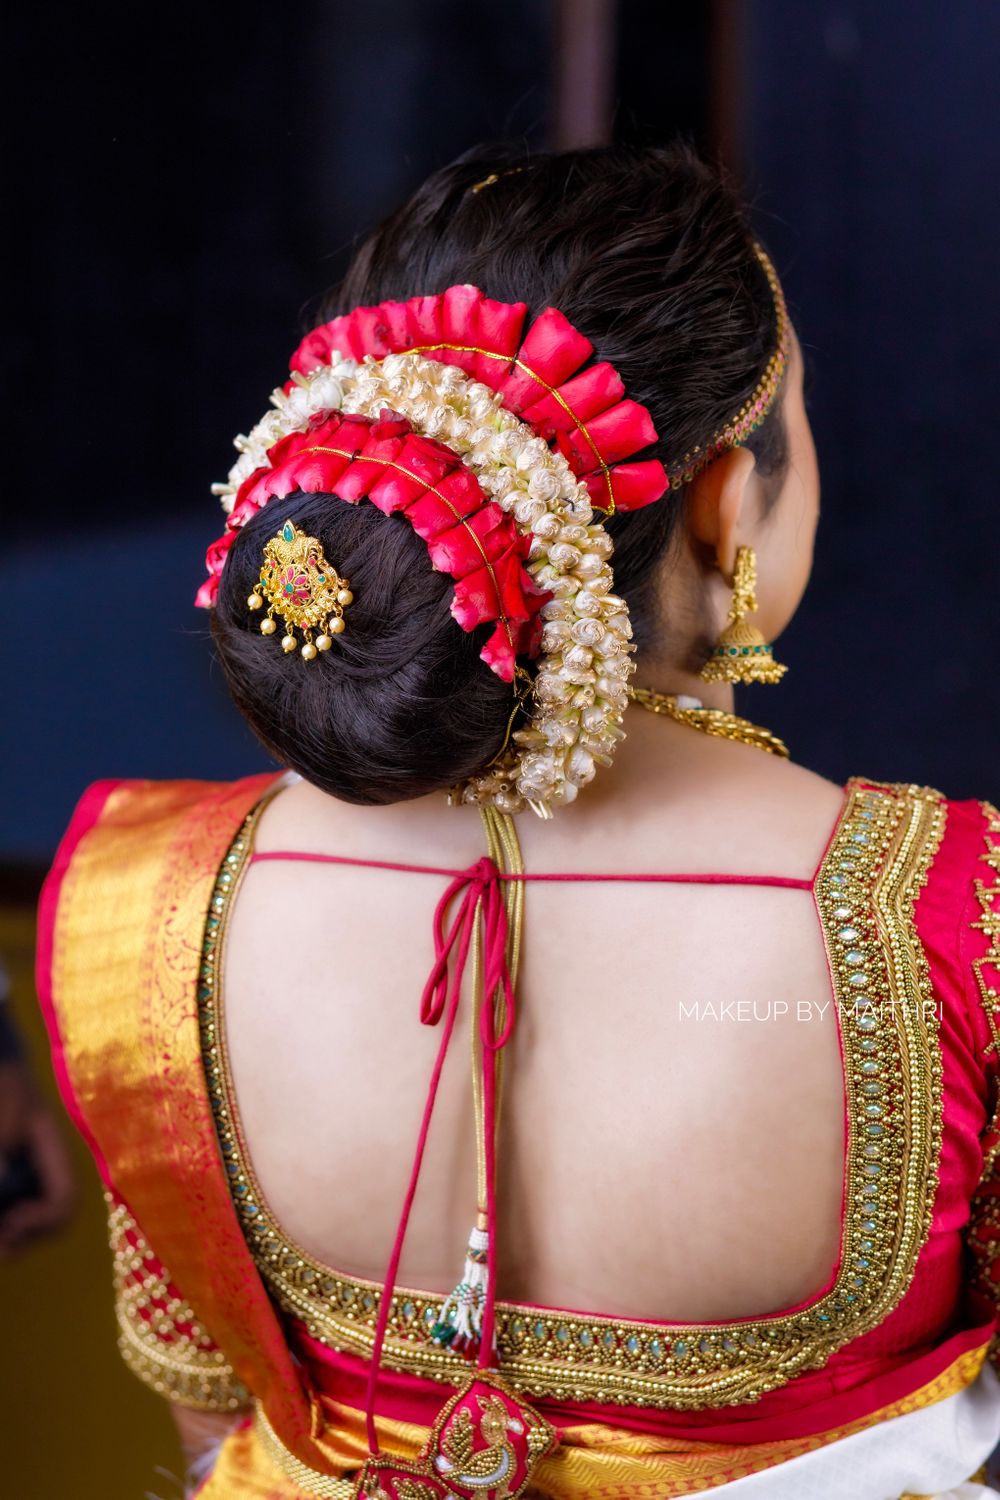 Photo By Makeup By Maithri - Bridal Makeup